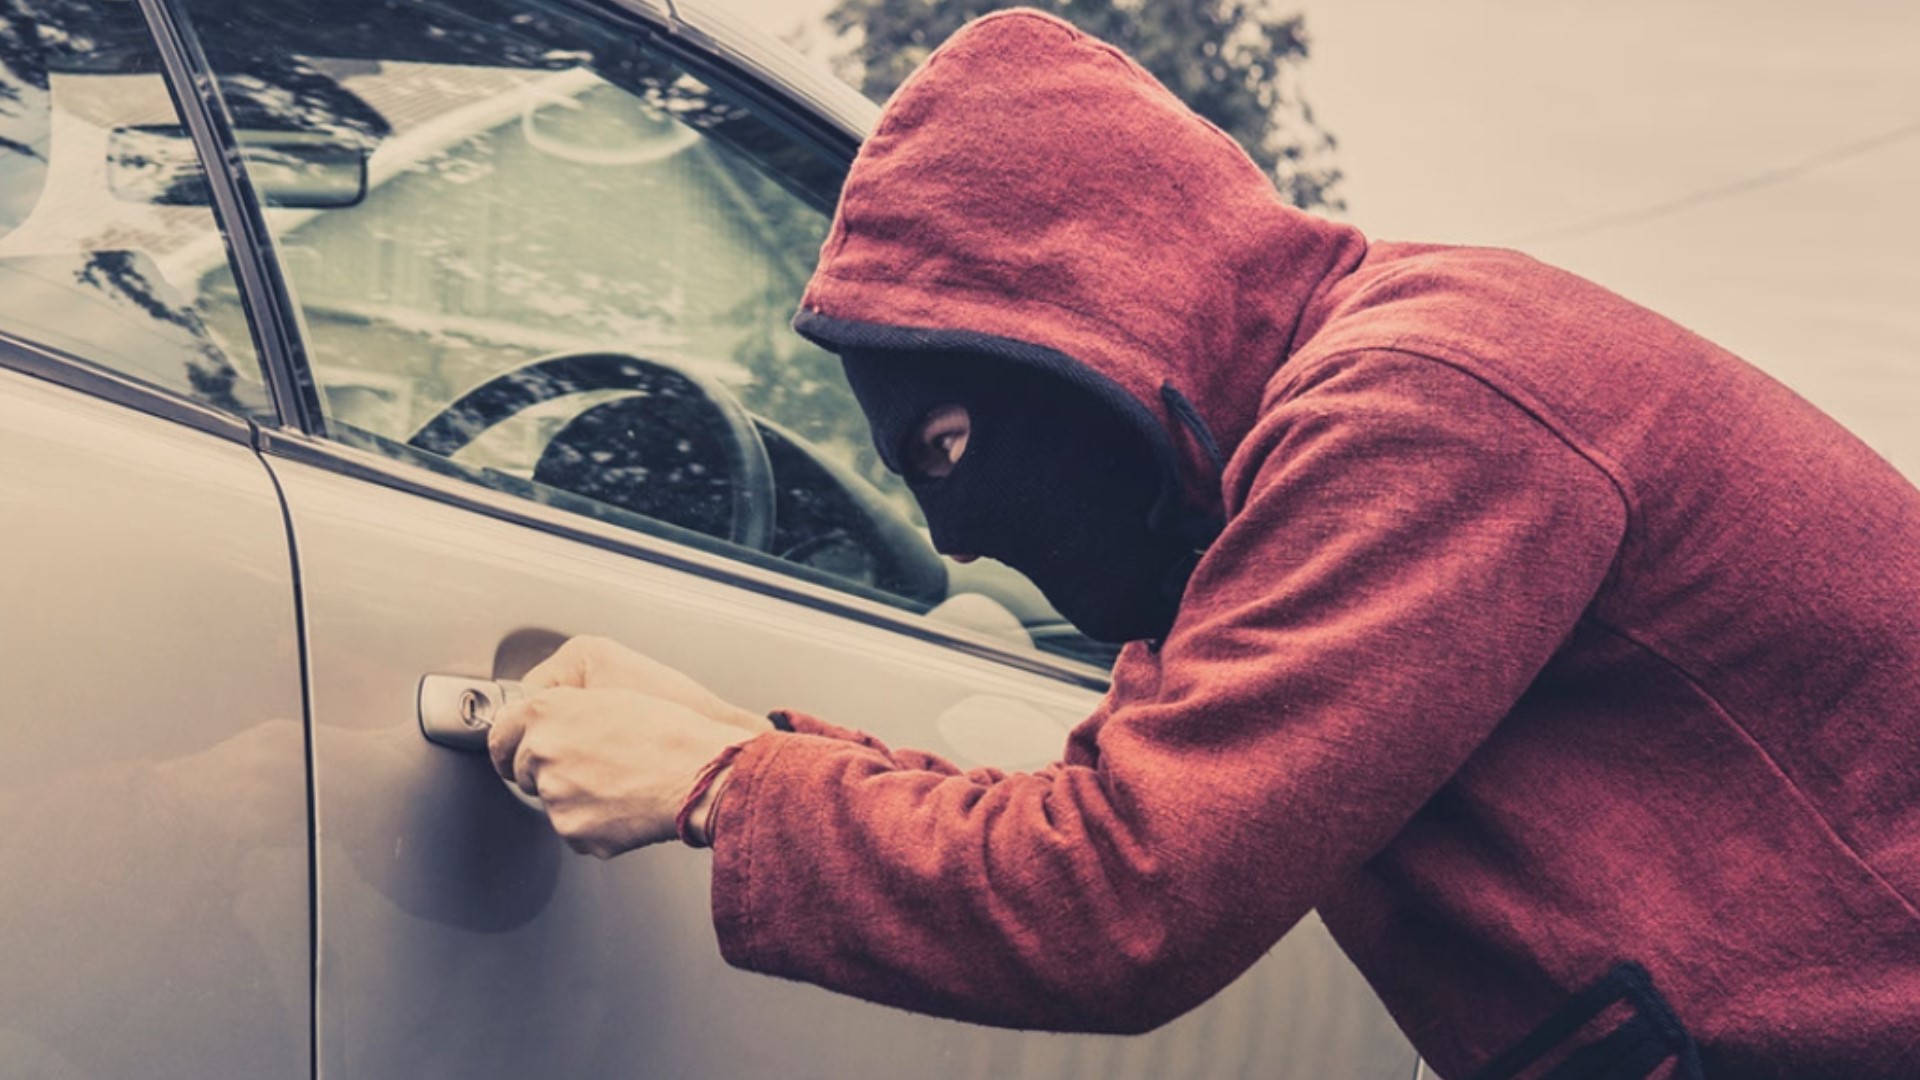 SAPD is warning residents about holiday auto theft. Texas is among the top five states for holiday auto theft, according to the National Insurance Crime Bureau .